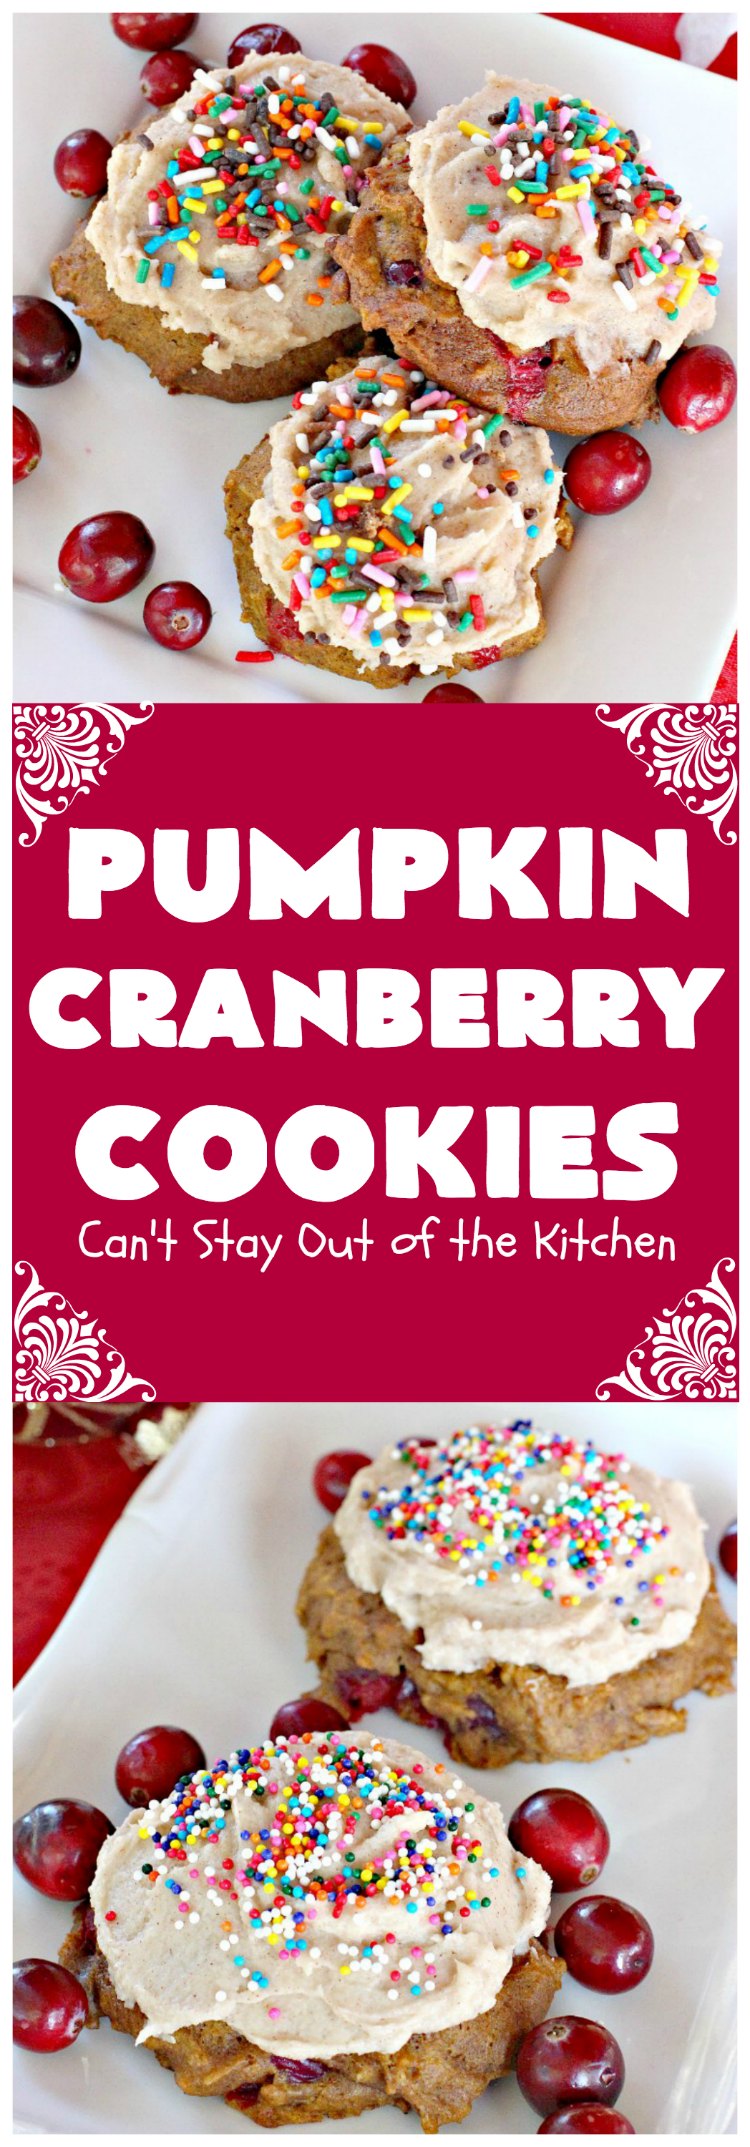 Pumpkin Cranberry Cookies | Can't Stay Out of the Kitchen